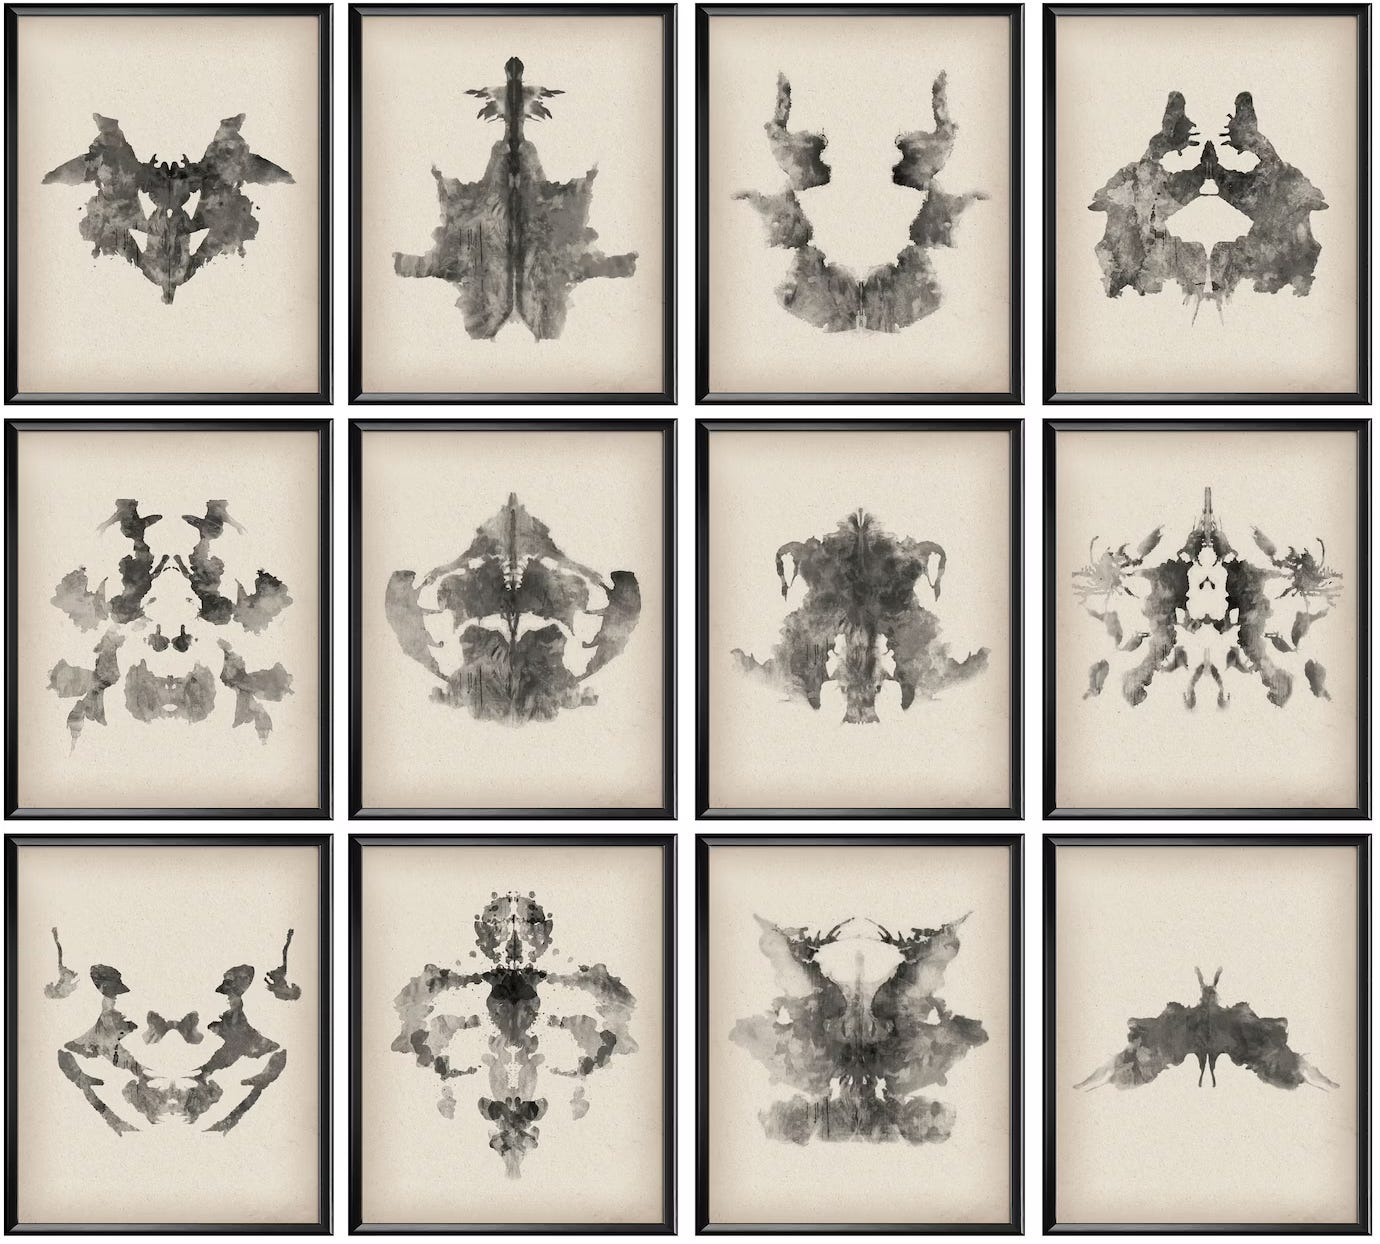 Assessing Perceptual Disturbances With the Rorschach